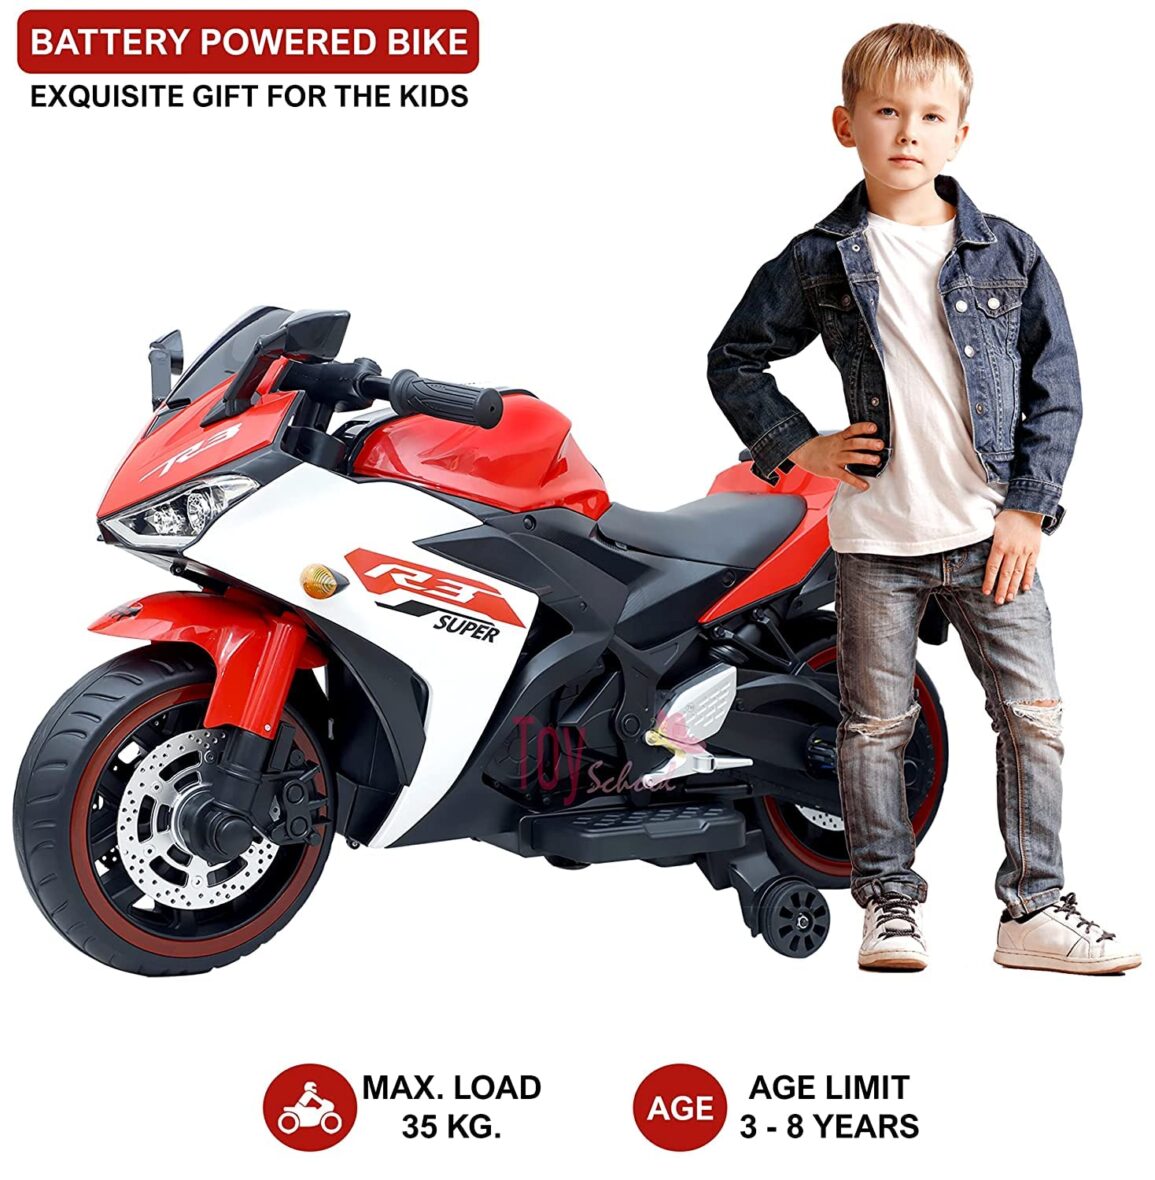 Nexus Product Toy R3 Bike with Rechargeable Battery Operated Ride on for Kids  Electric Children Bike [3 to 8 Years, Large, Red]